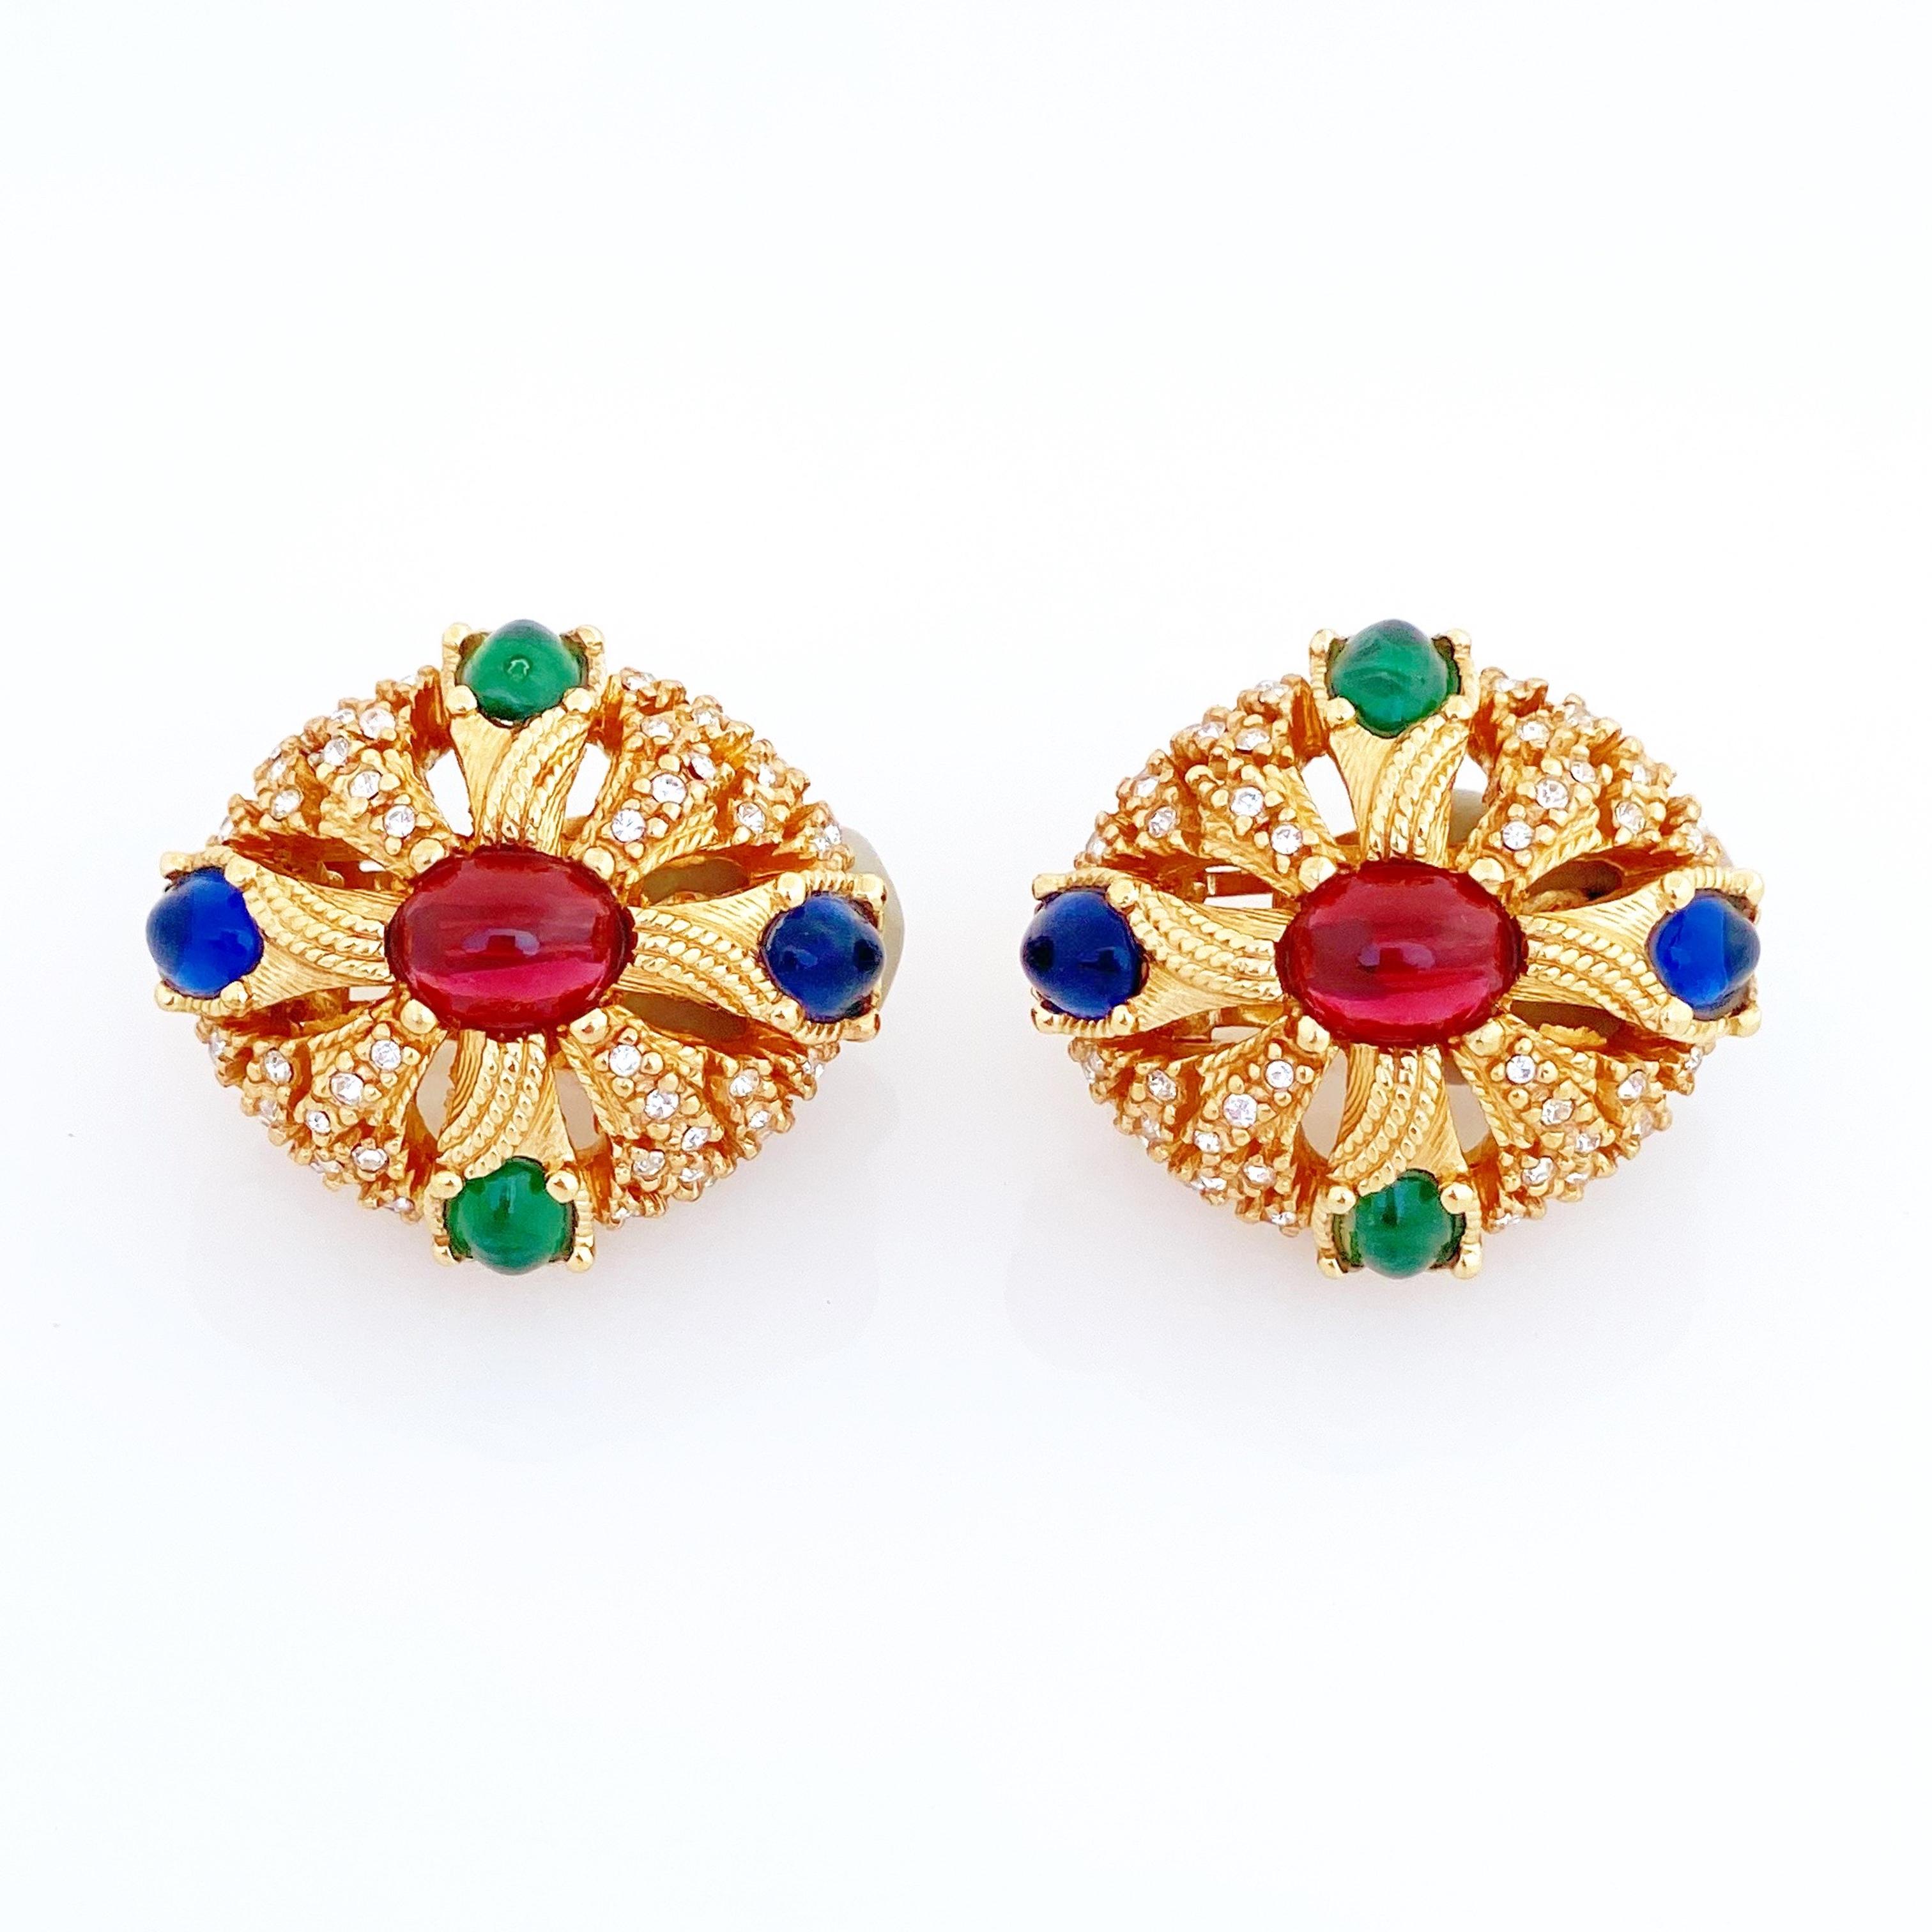 Jewels Of India Mughal Gripoix Glass Earrings By Ciner, 1950s at ...